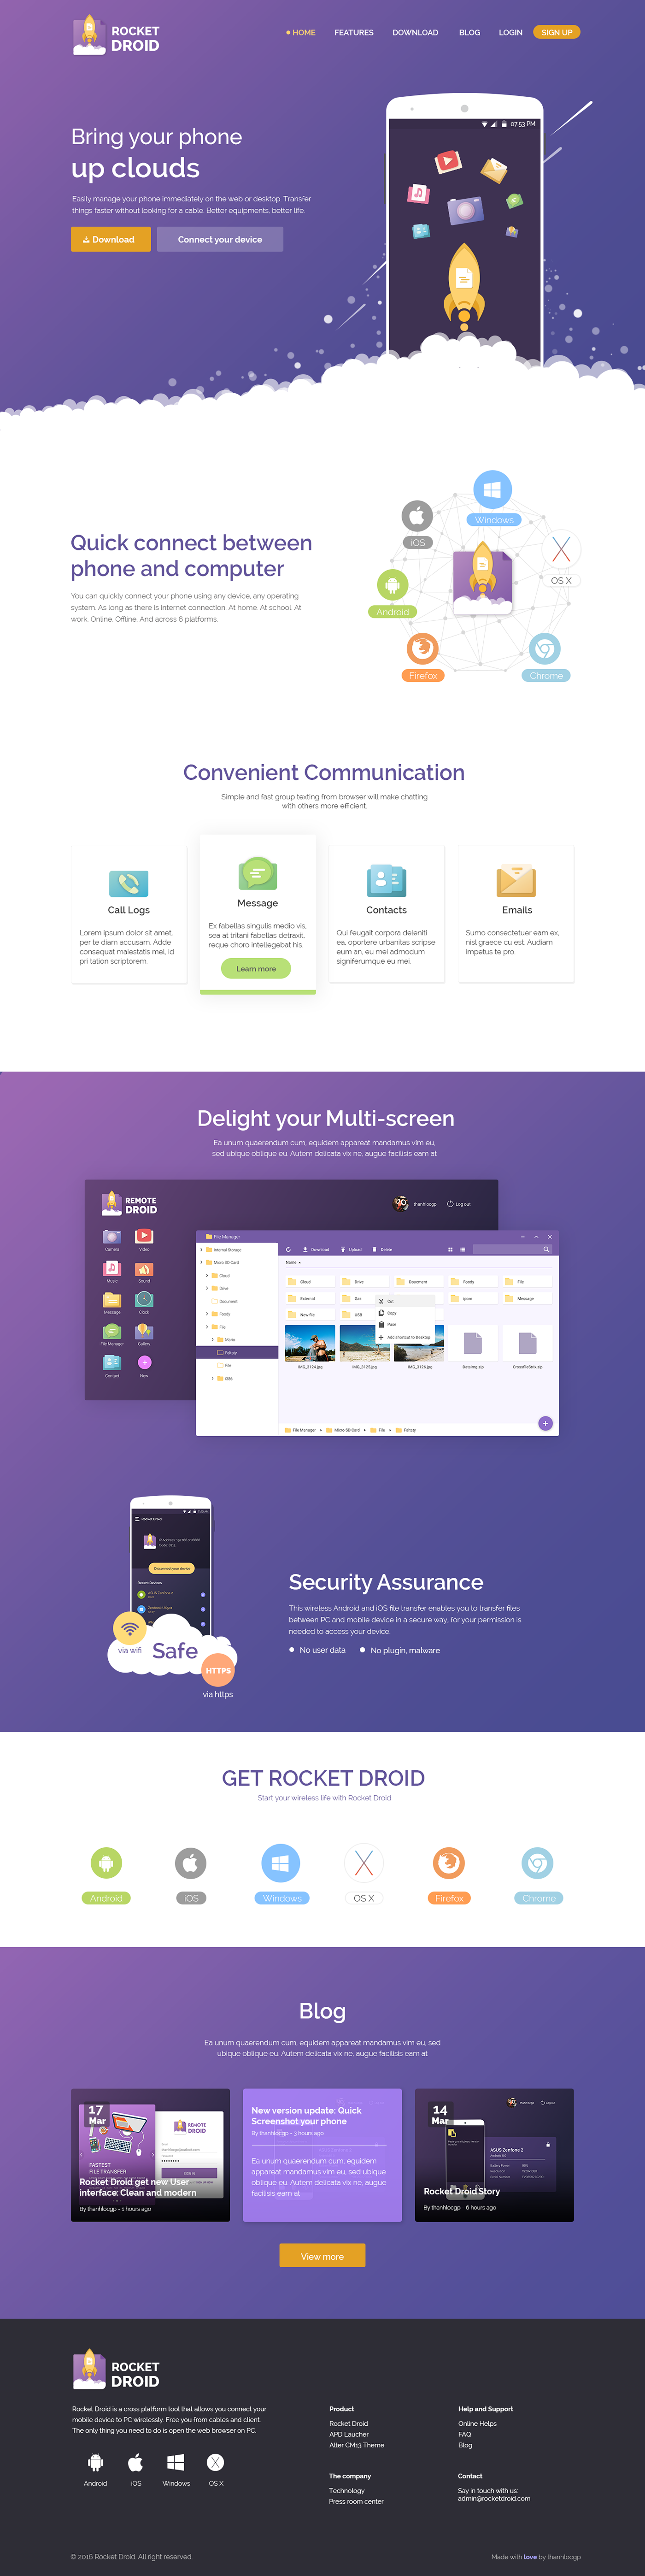 RocketDroid landing landing page Website product Startup flat clean clear TRANSFER Data security colorful purple